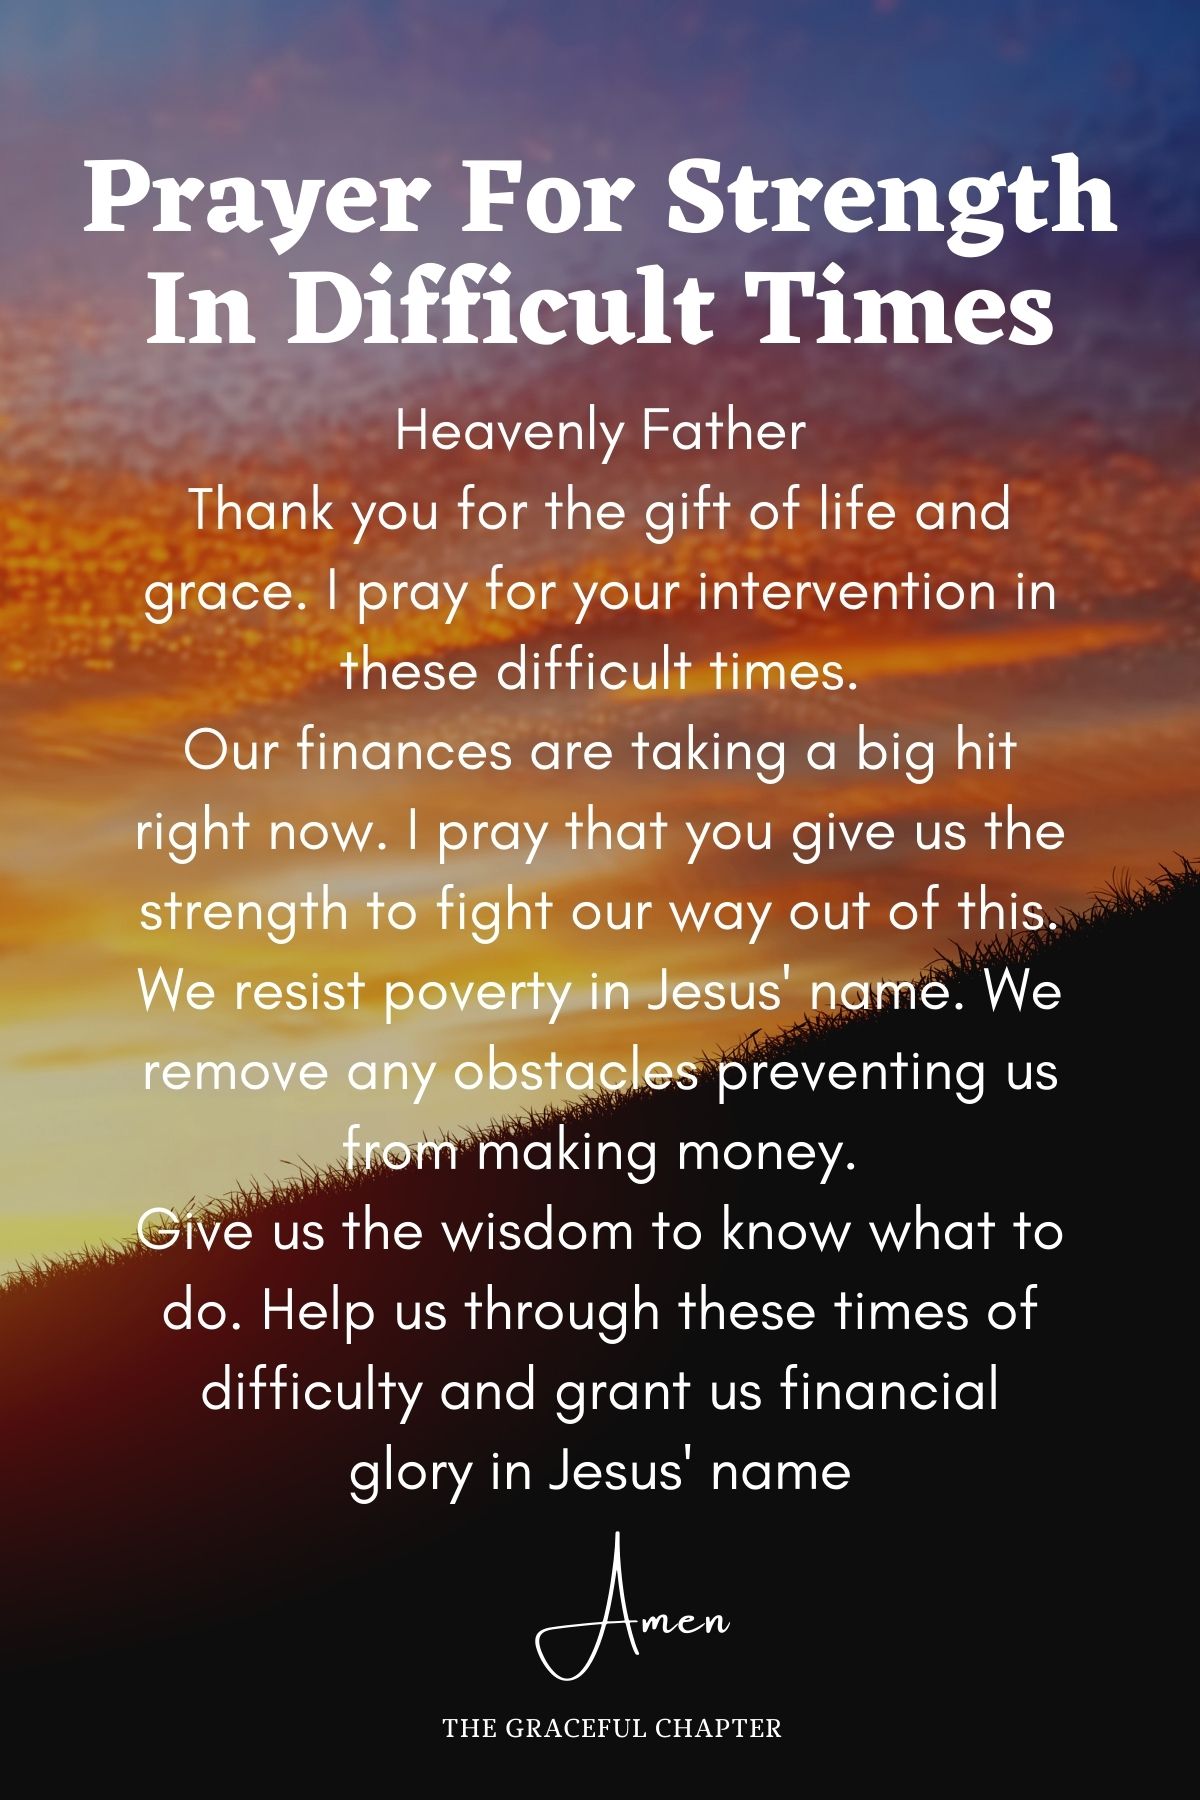 Prayer for strength in difficult times